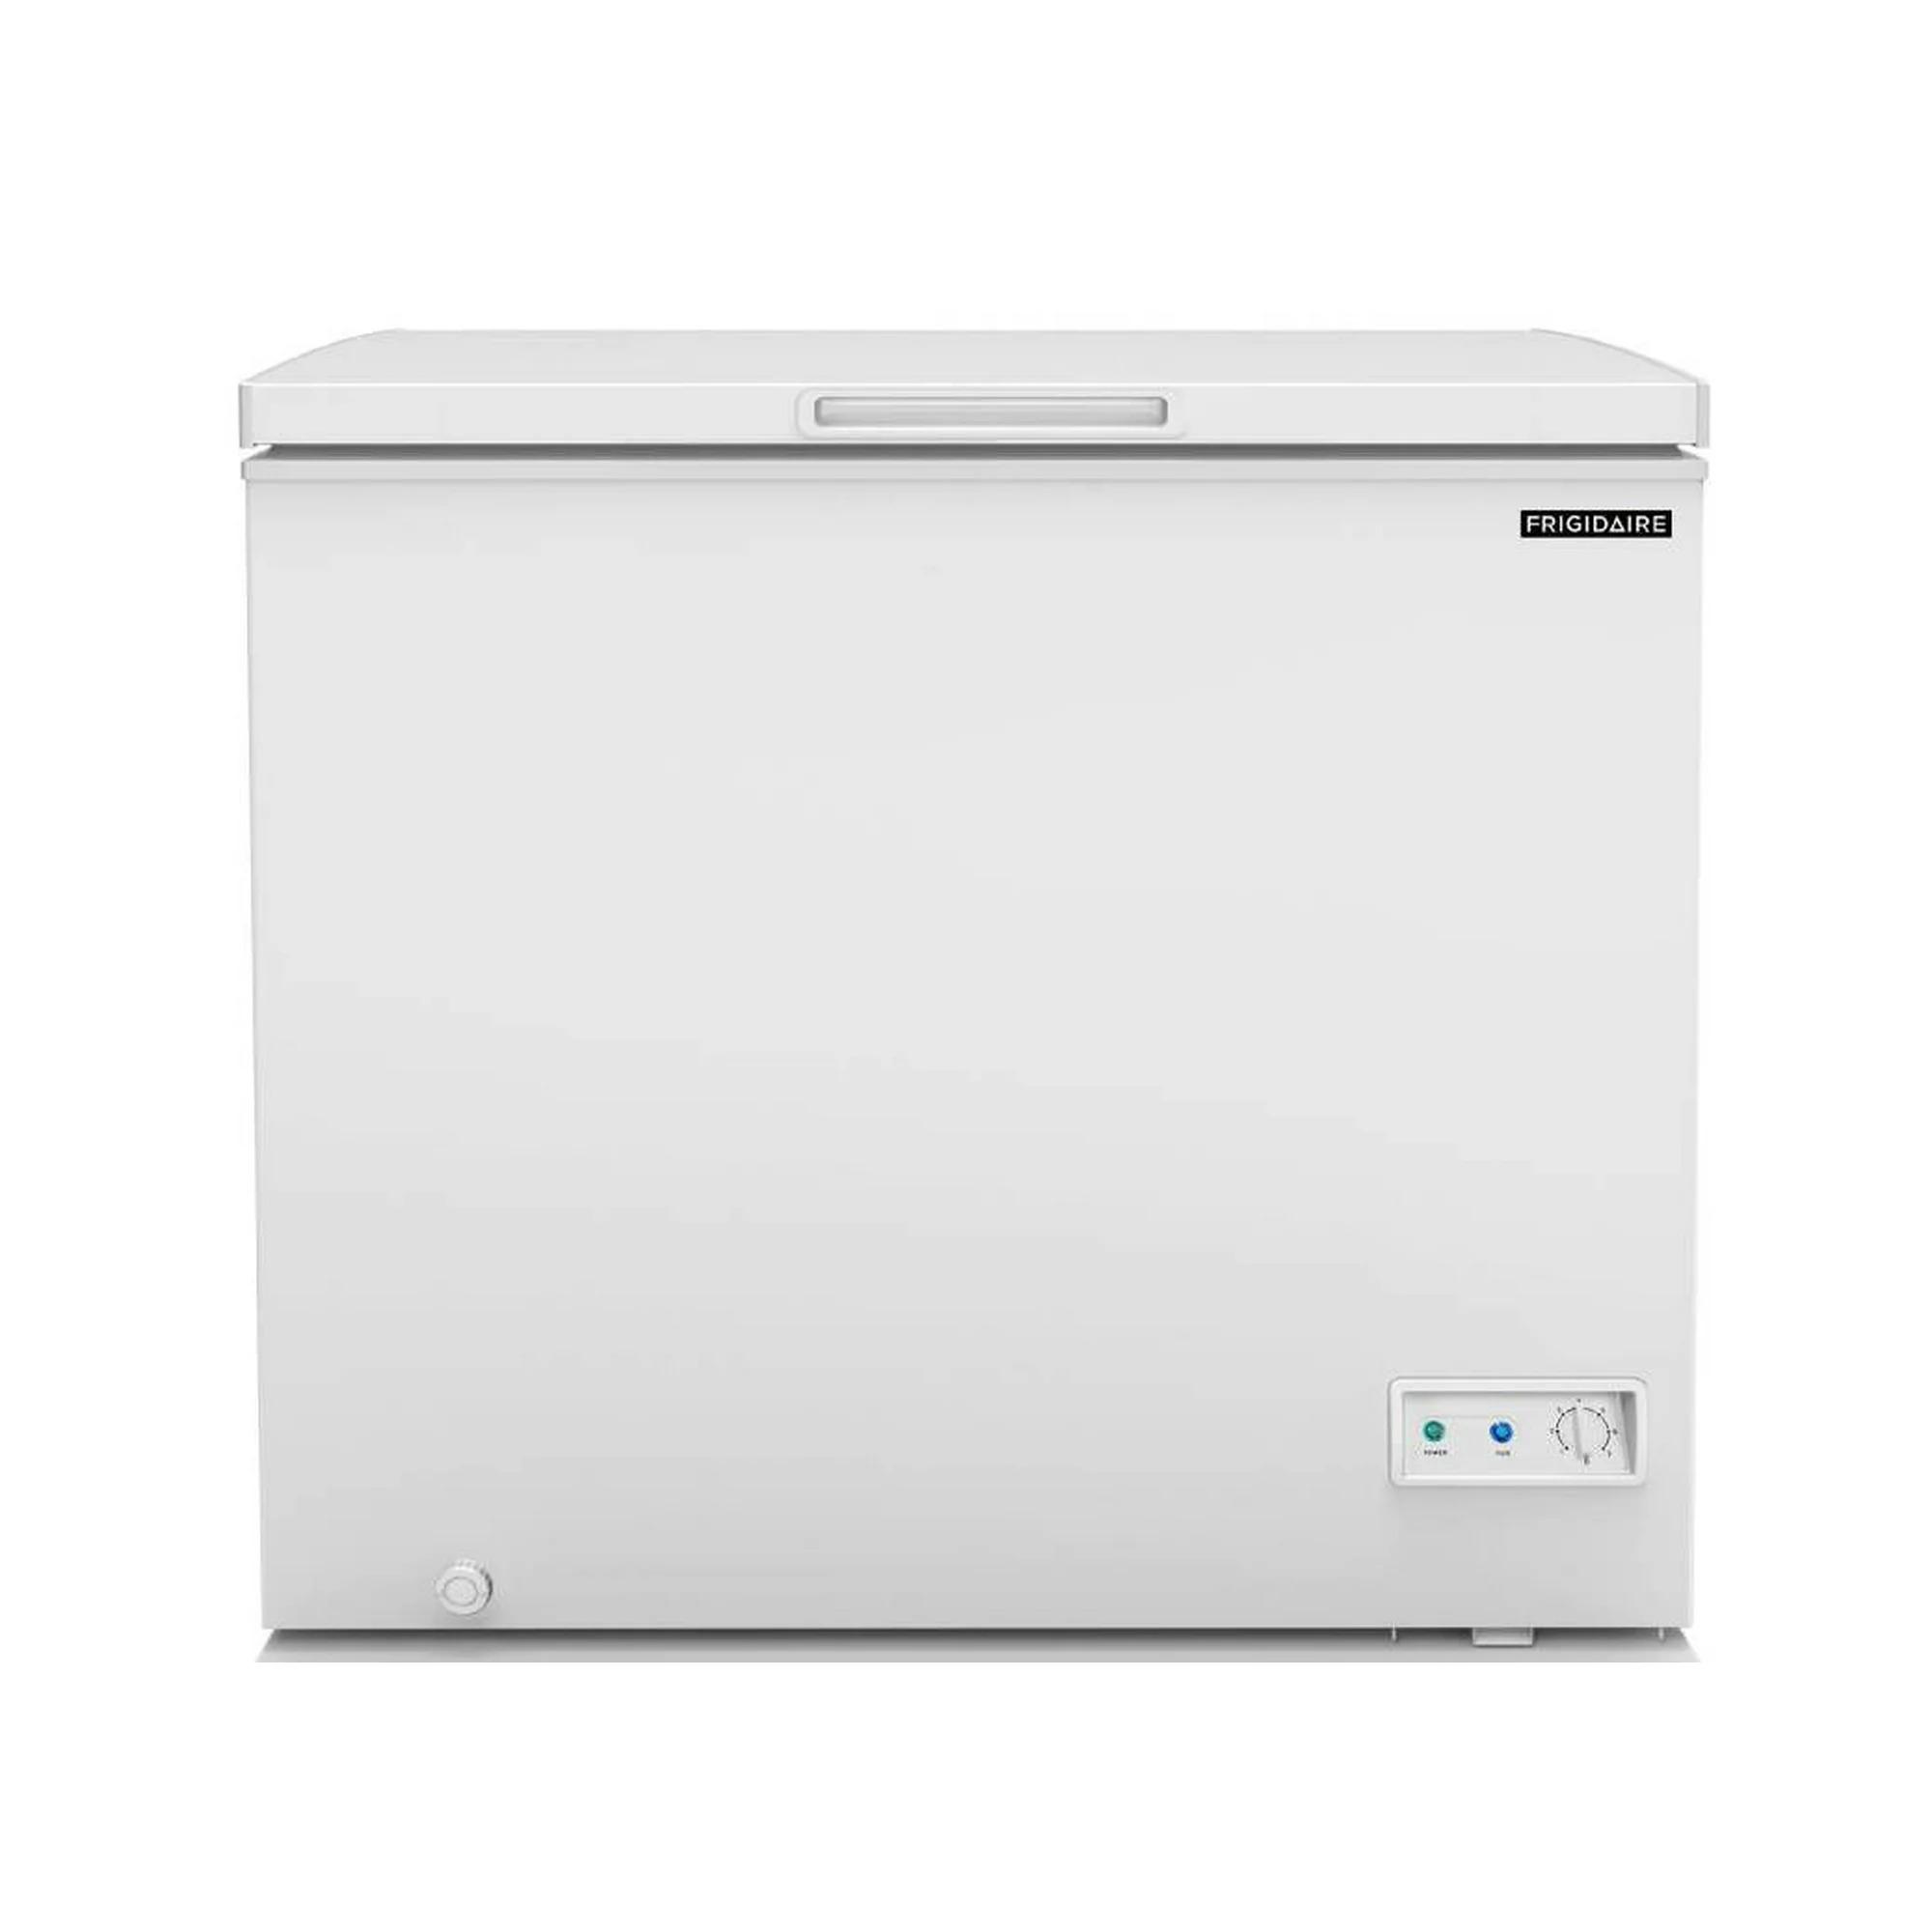 Frigidaire EFRF7003 7 Cubic Feet Chest Freezer for $159 Shipped